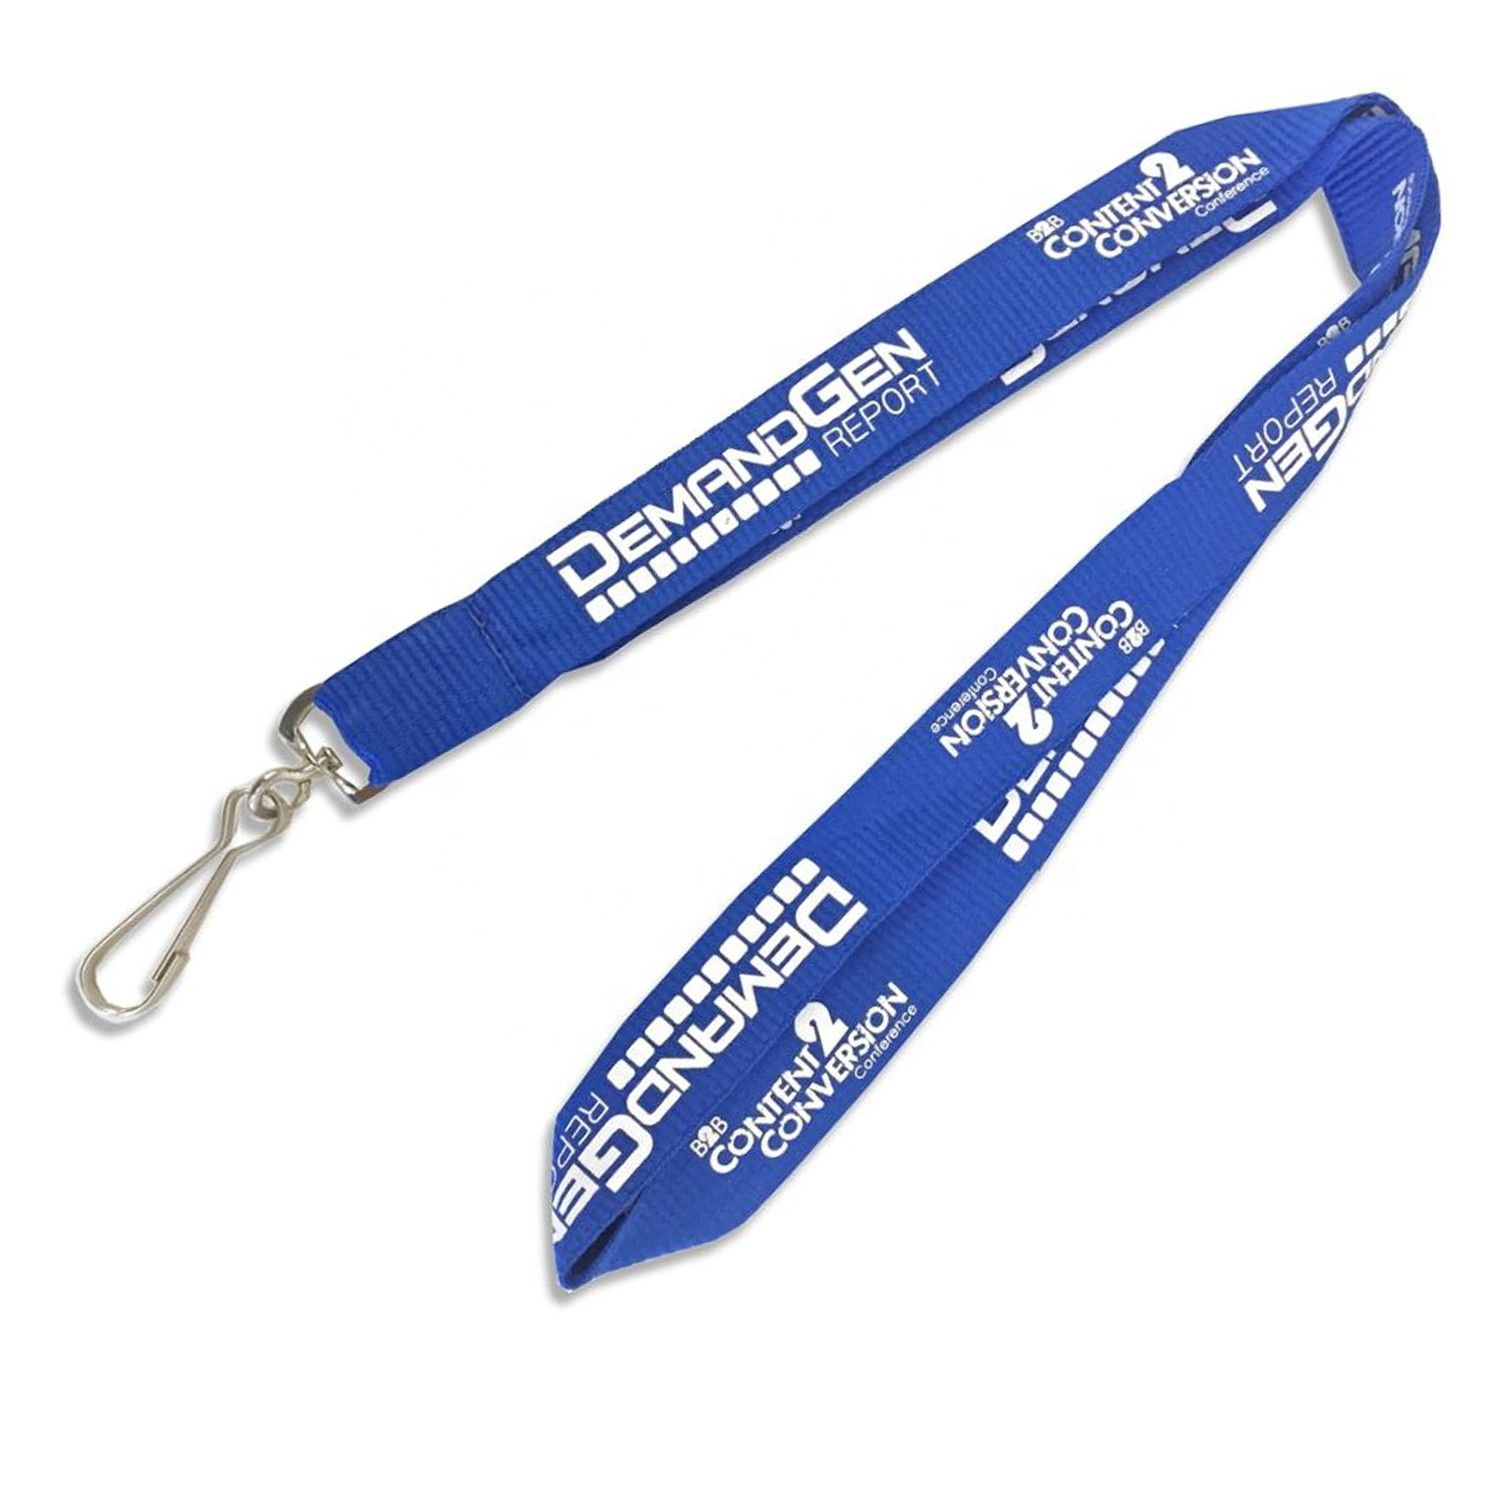 Lanyard 1" inch Polyester Screenprinted 1 color 1 side - 1" W x 36" L